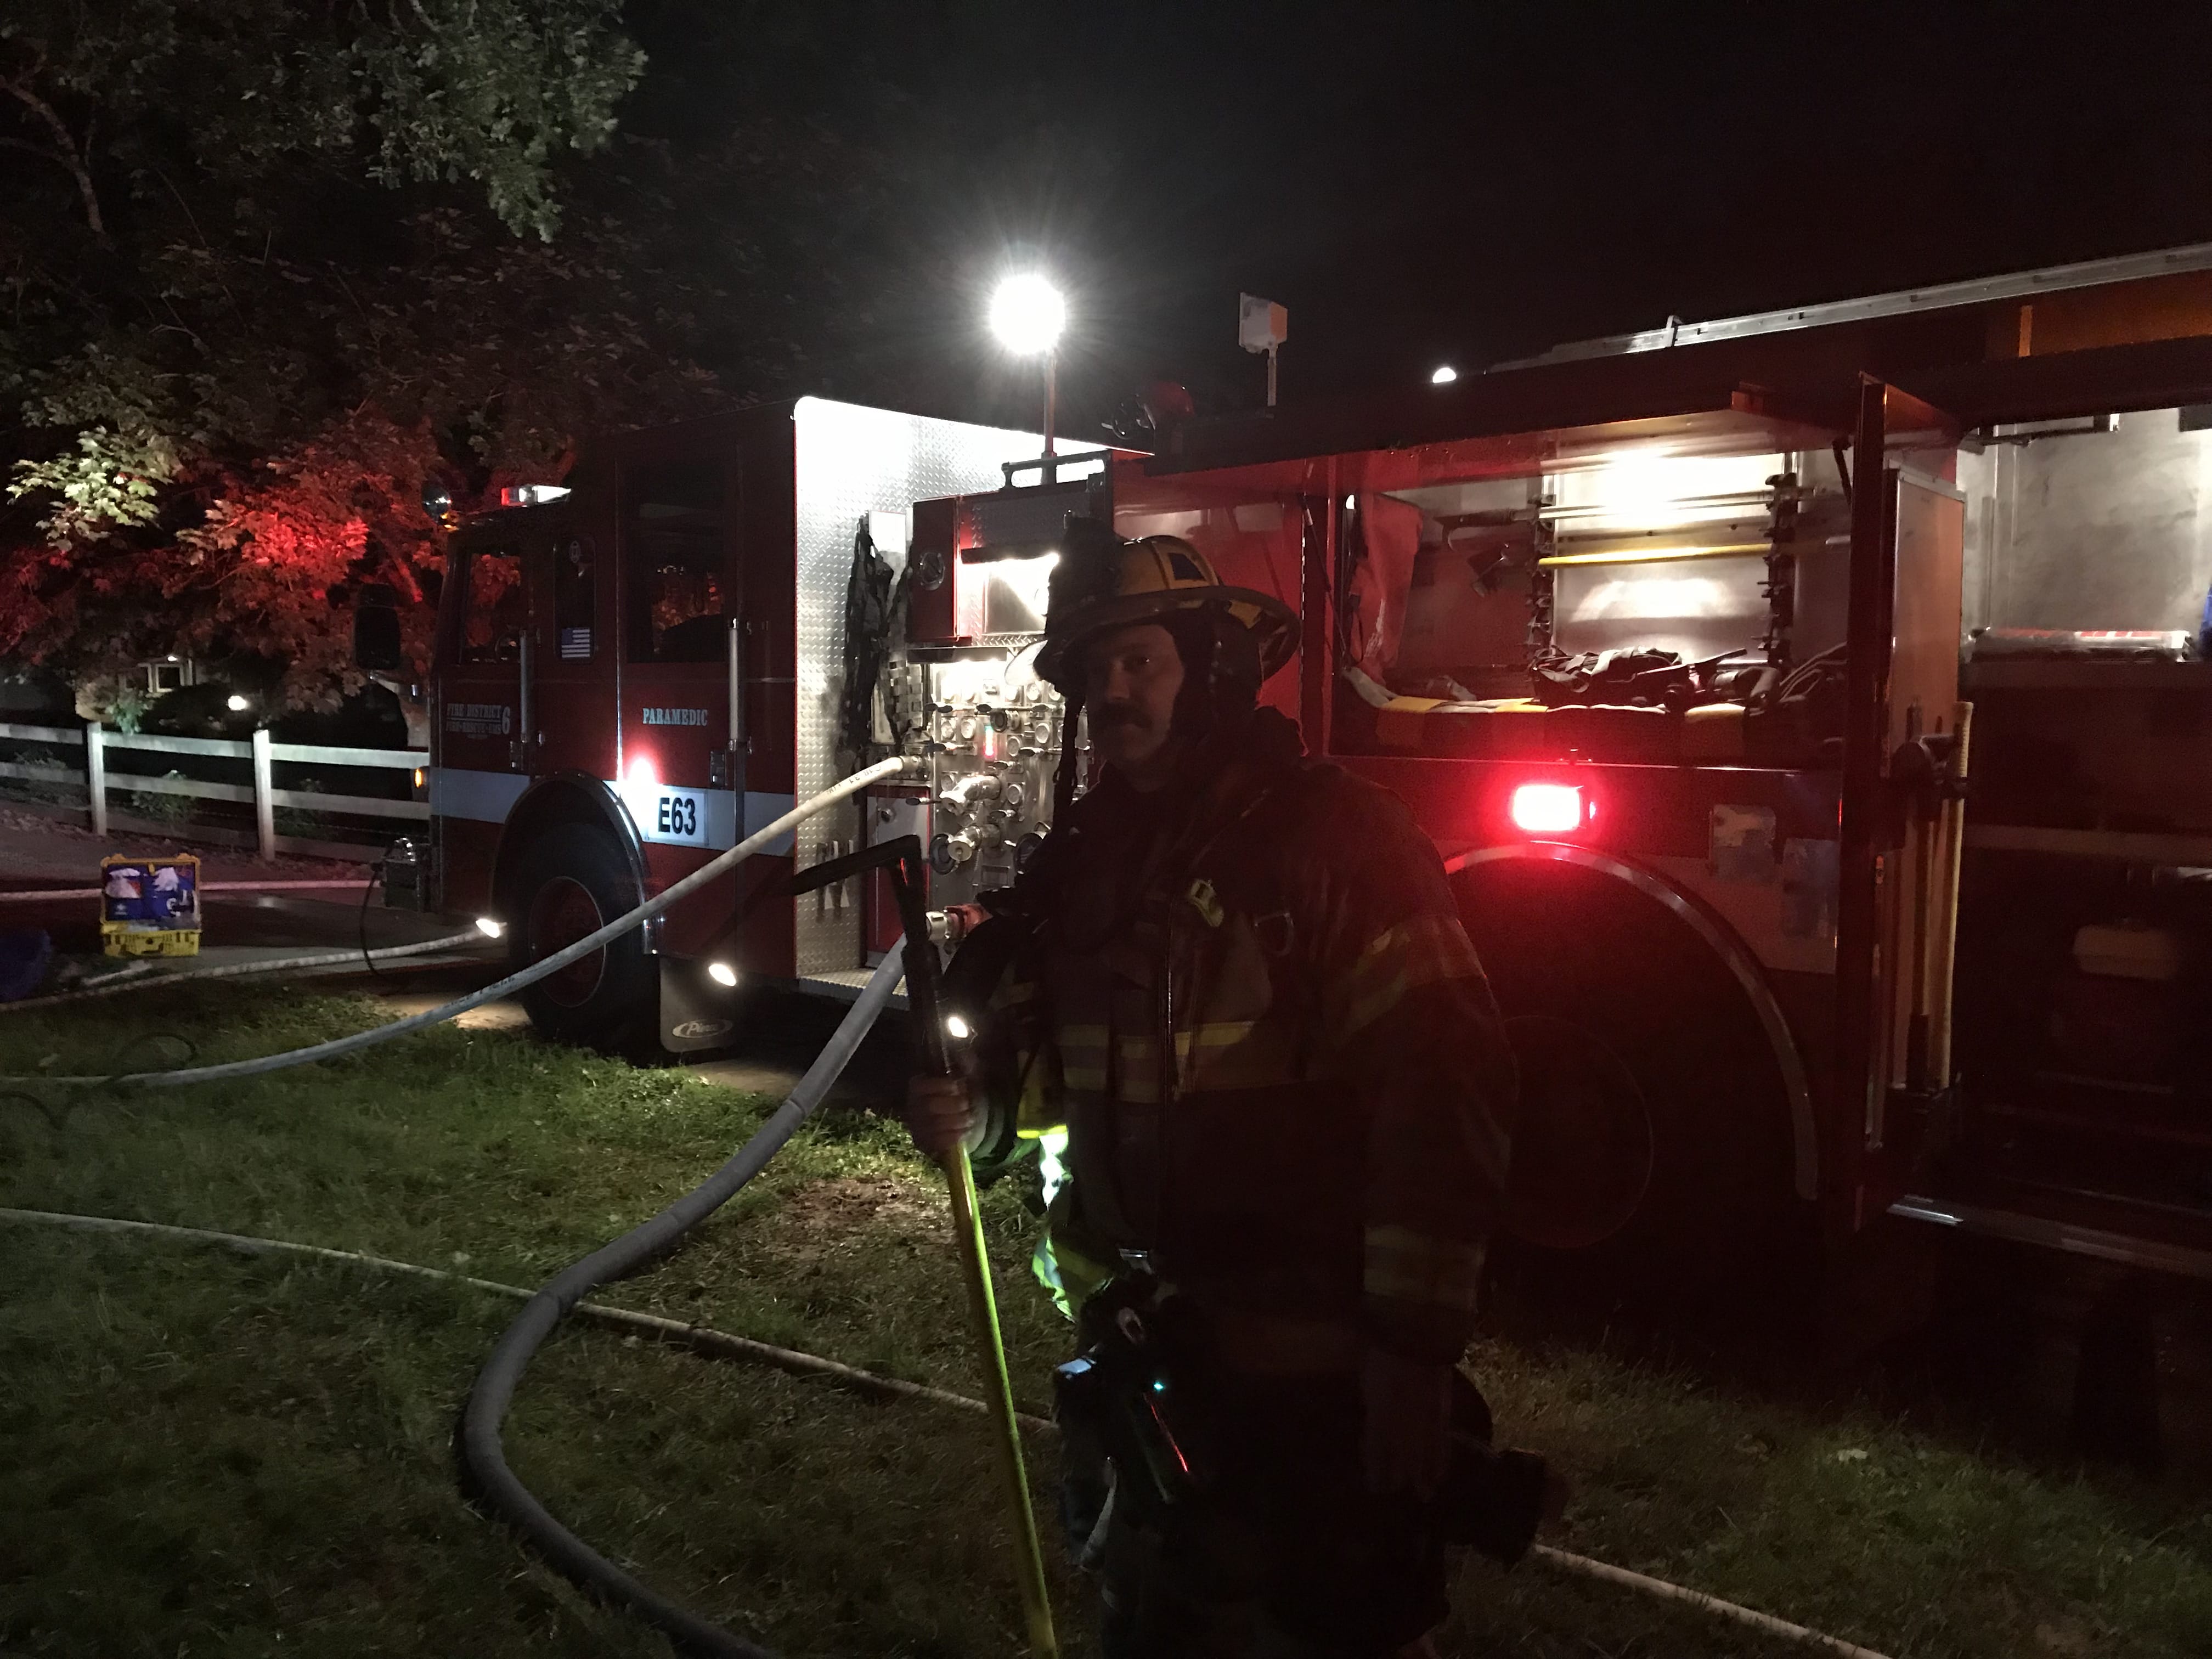 Fire District 6 crews were dispatched shortly after 2 a.m. Monday to 15508 N.W. 21st Avenue for the report of a residential fire. Officials say the fire, which killed a dog and displaced a family, was challenging due to its distance from a fire hydrant.